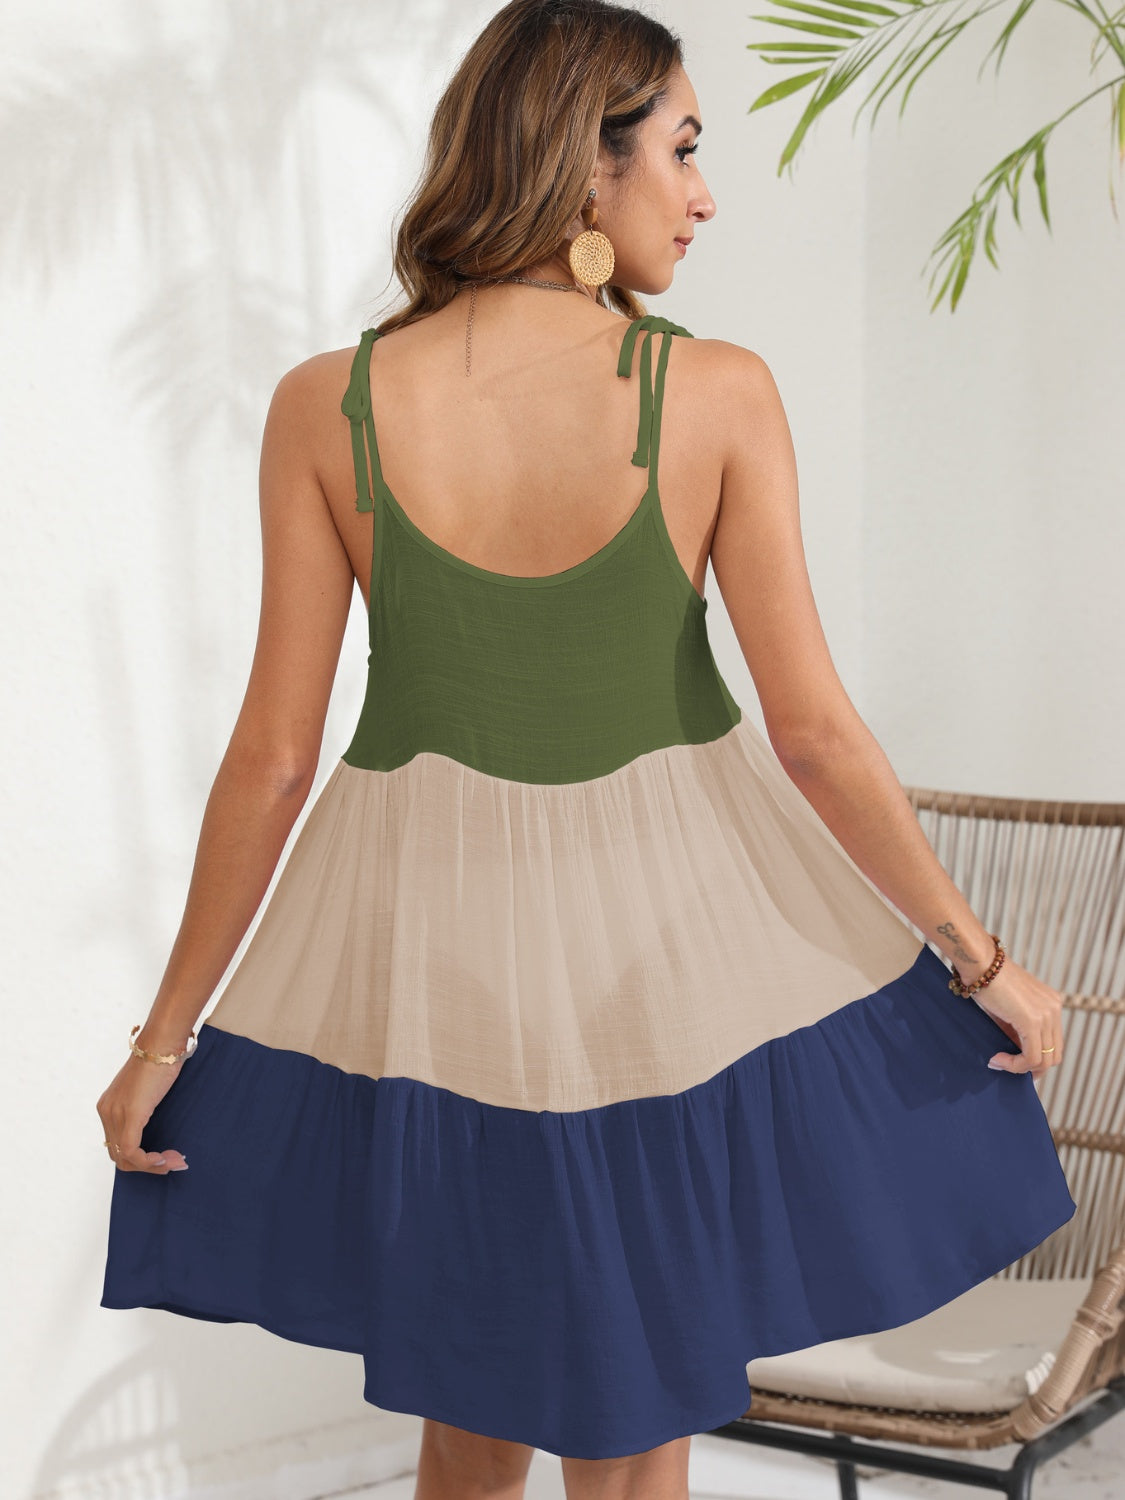 Embrace summer with our airy Color Block Dress, perfect for beach to bistro transitions. Adjustable fit, in 3 vibrant color combos.